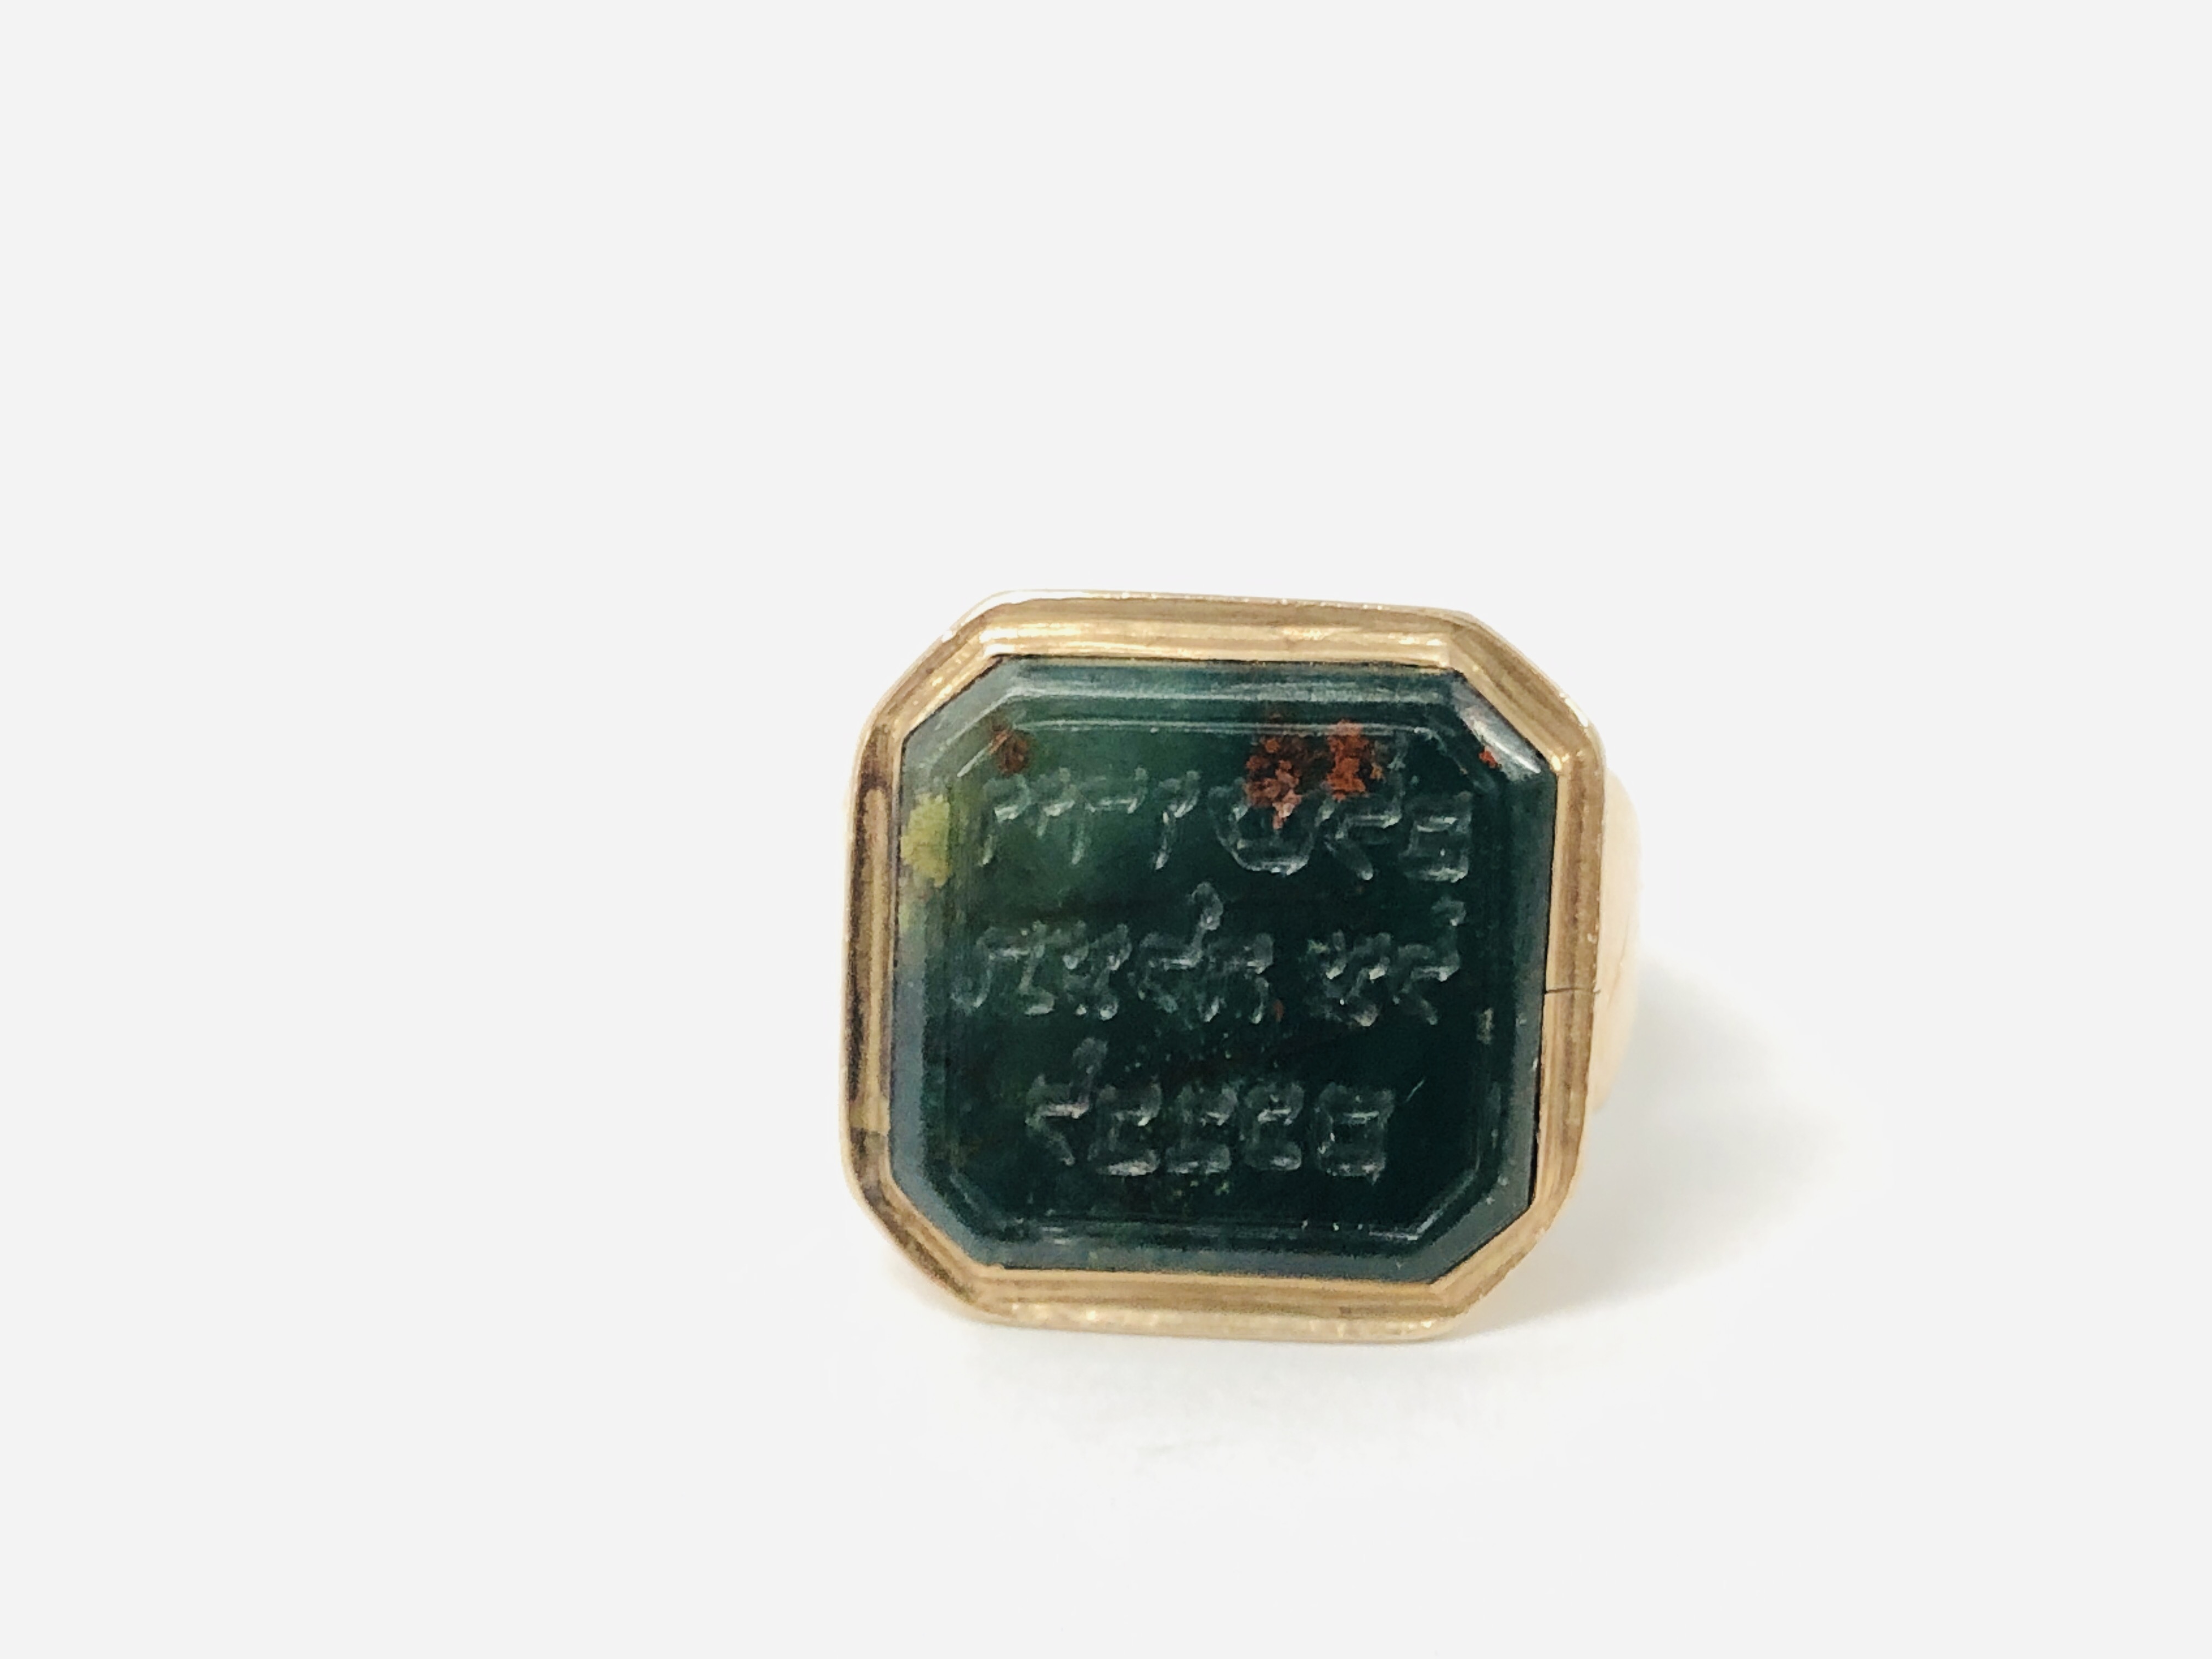 A YELLOW METAL RING & BLOODSTONE SIGNET RING INSCRIBED WITH HEBREW TEXT - SIZE M / N - Image 3 of 6